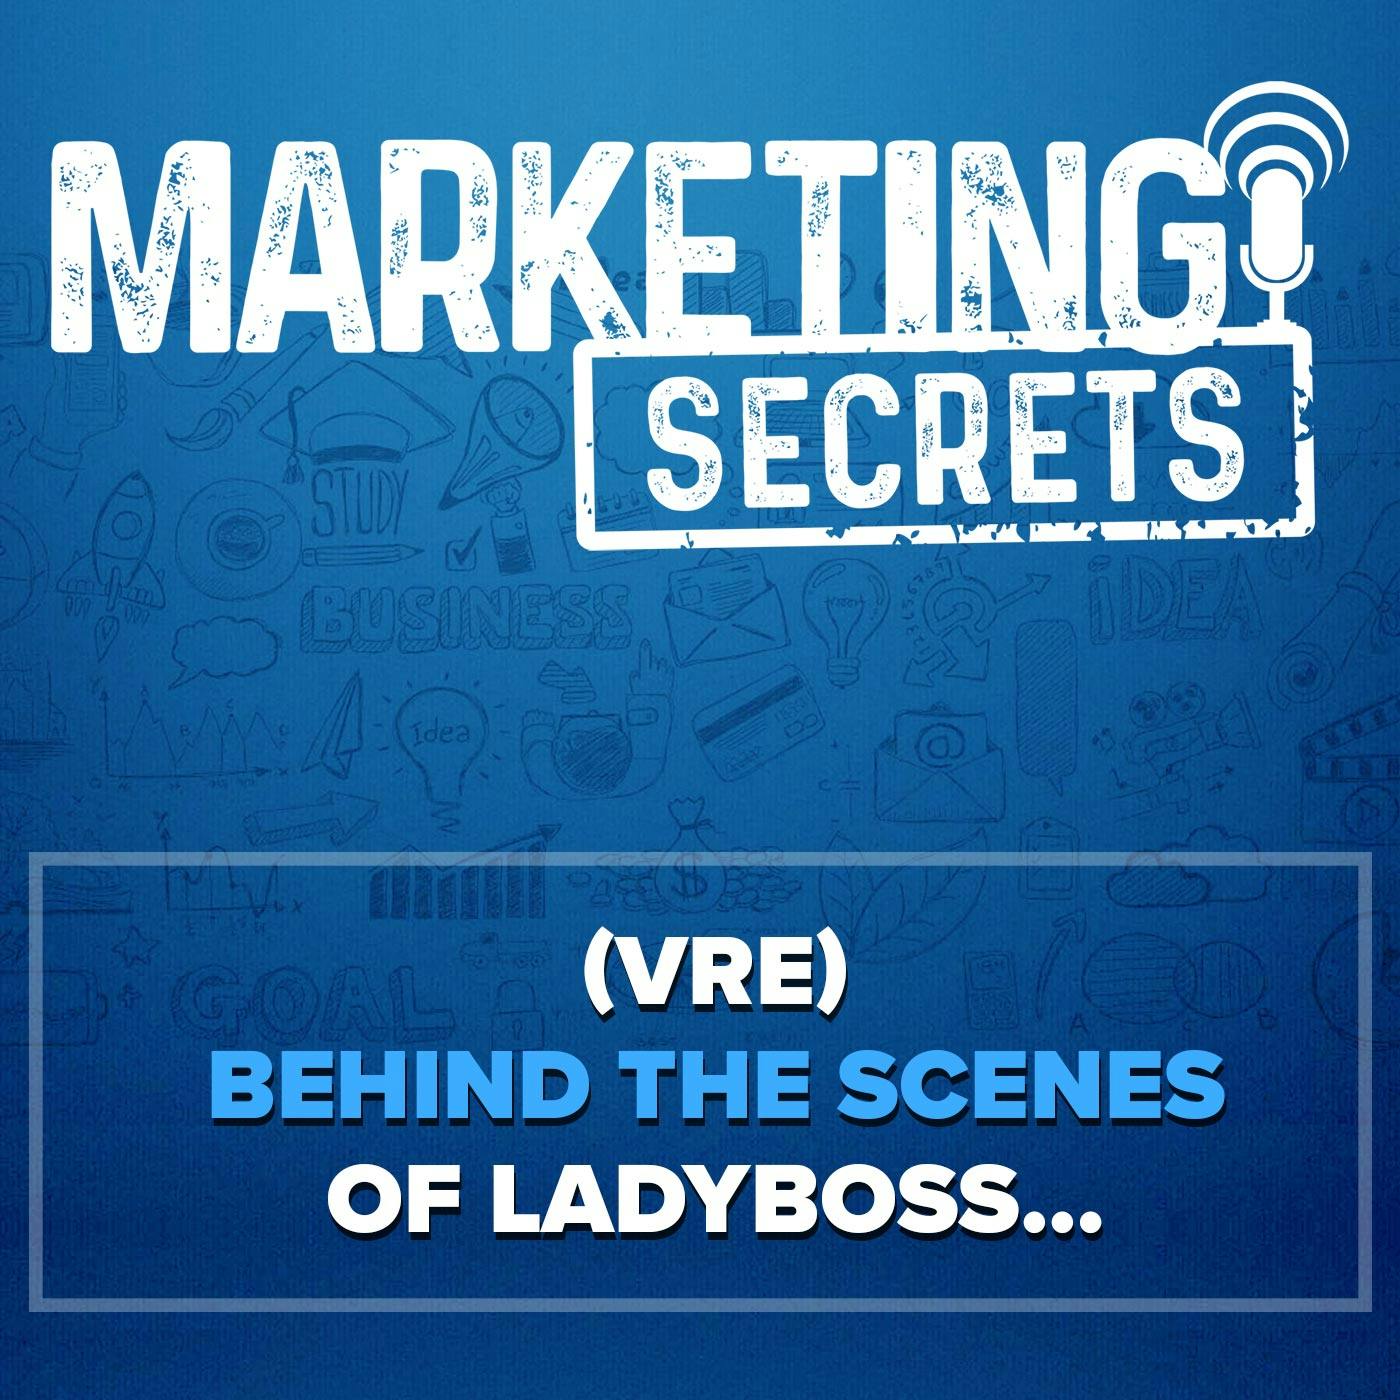 (VRE) Behind the Scenes of LadyBoss… by Russell Brunson